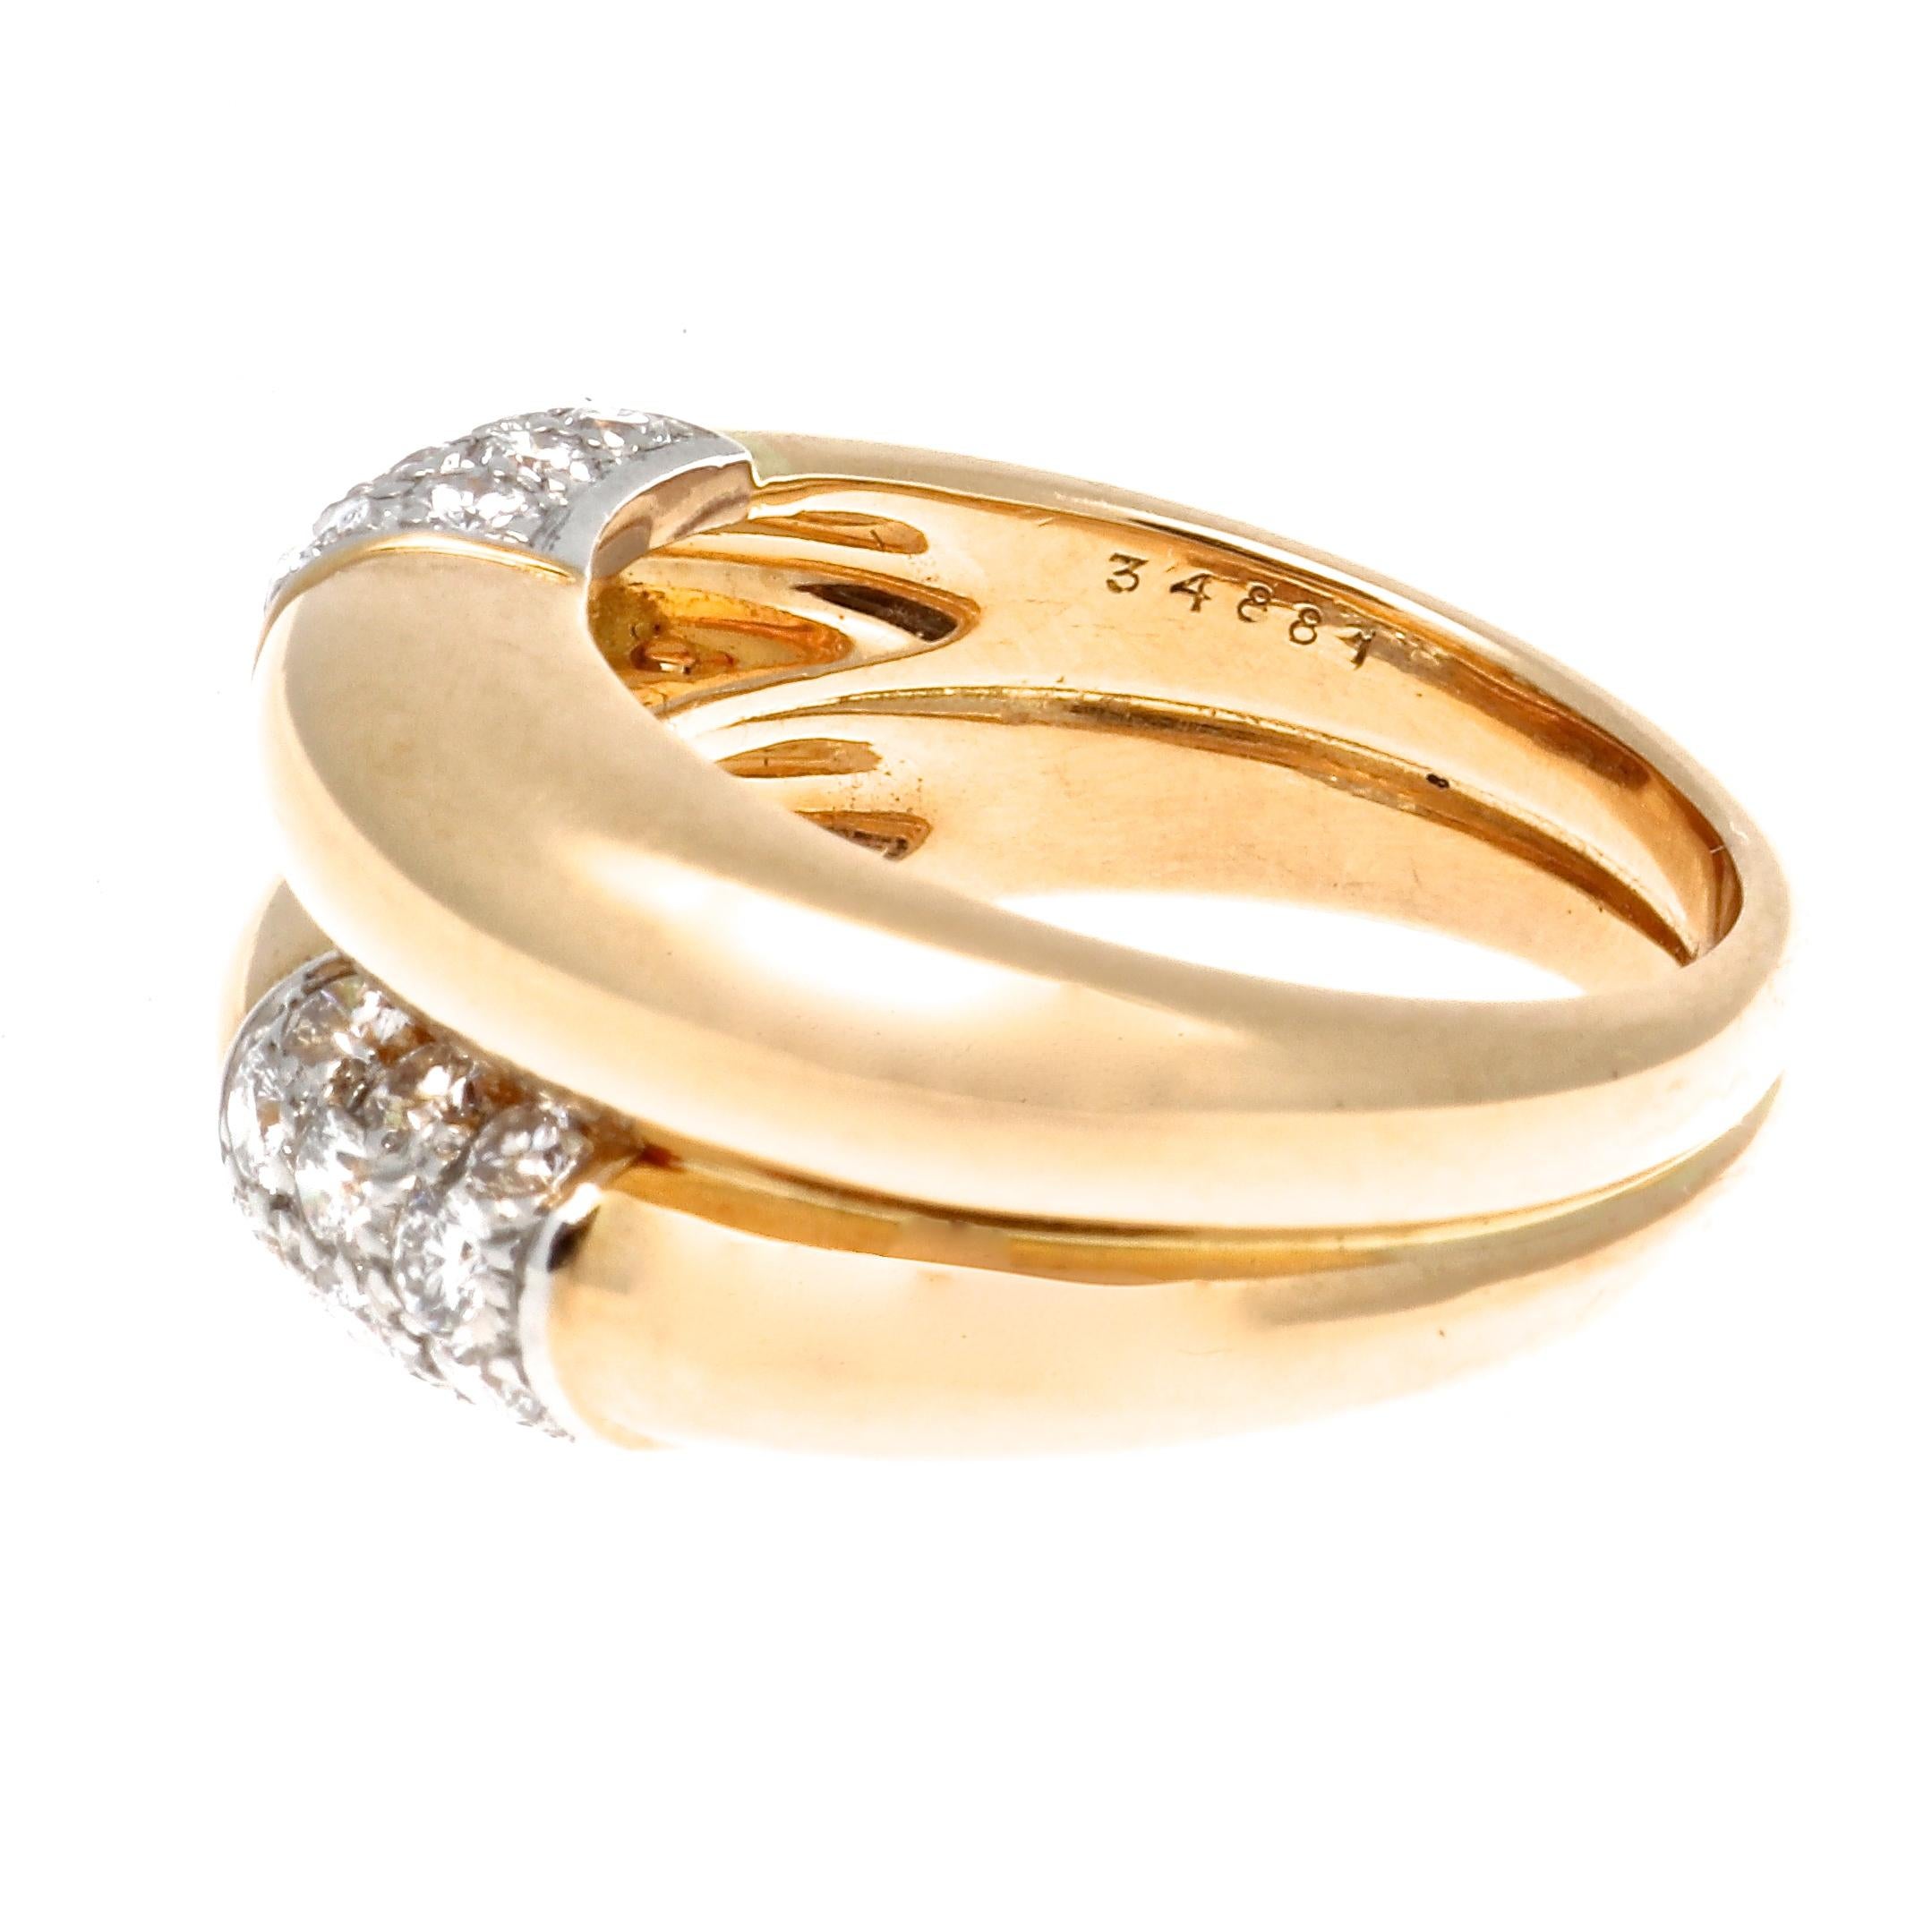 Cartier is the story of family and not just jewelry. Every design is filled with love and mindfulness. If the Cartier signature adorns the jewelry it represents the honorable name and family. Featuring two effortless swooping golden rings uniquely